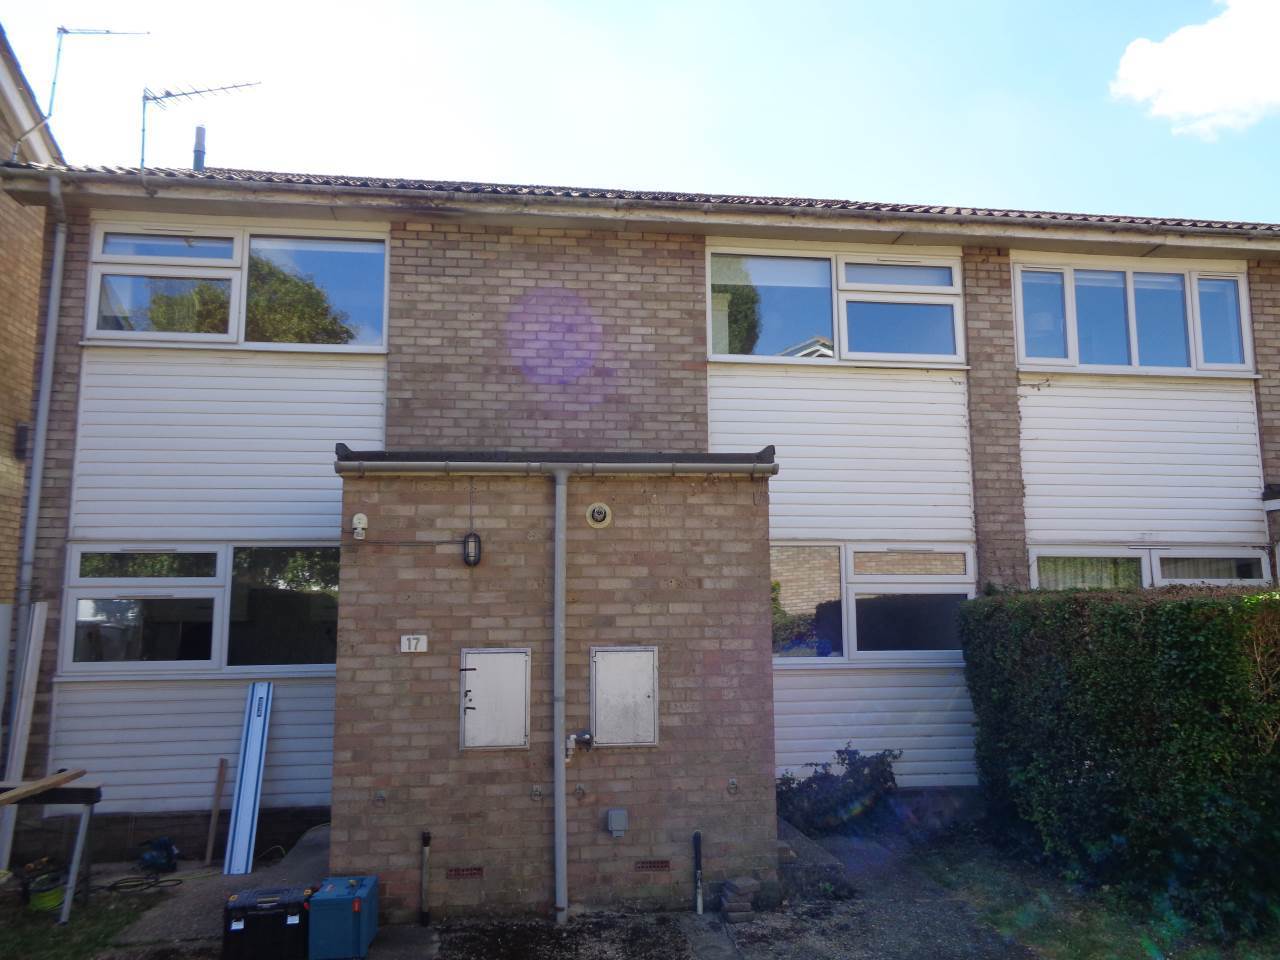 2 bed House (unspecified) for rent in Fen Ditton. From Lets Rent Cambridge